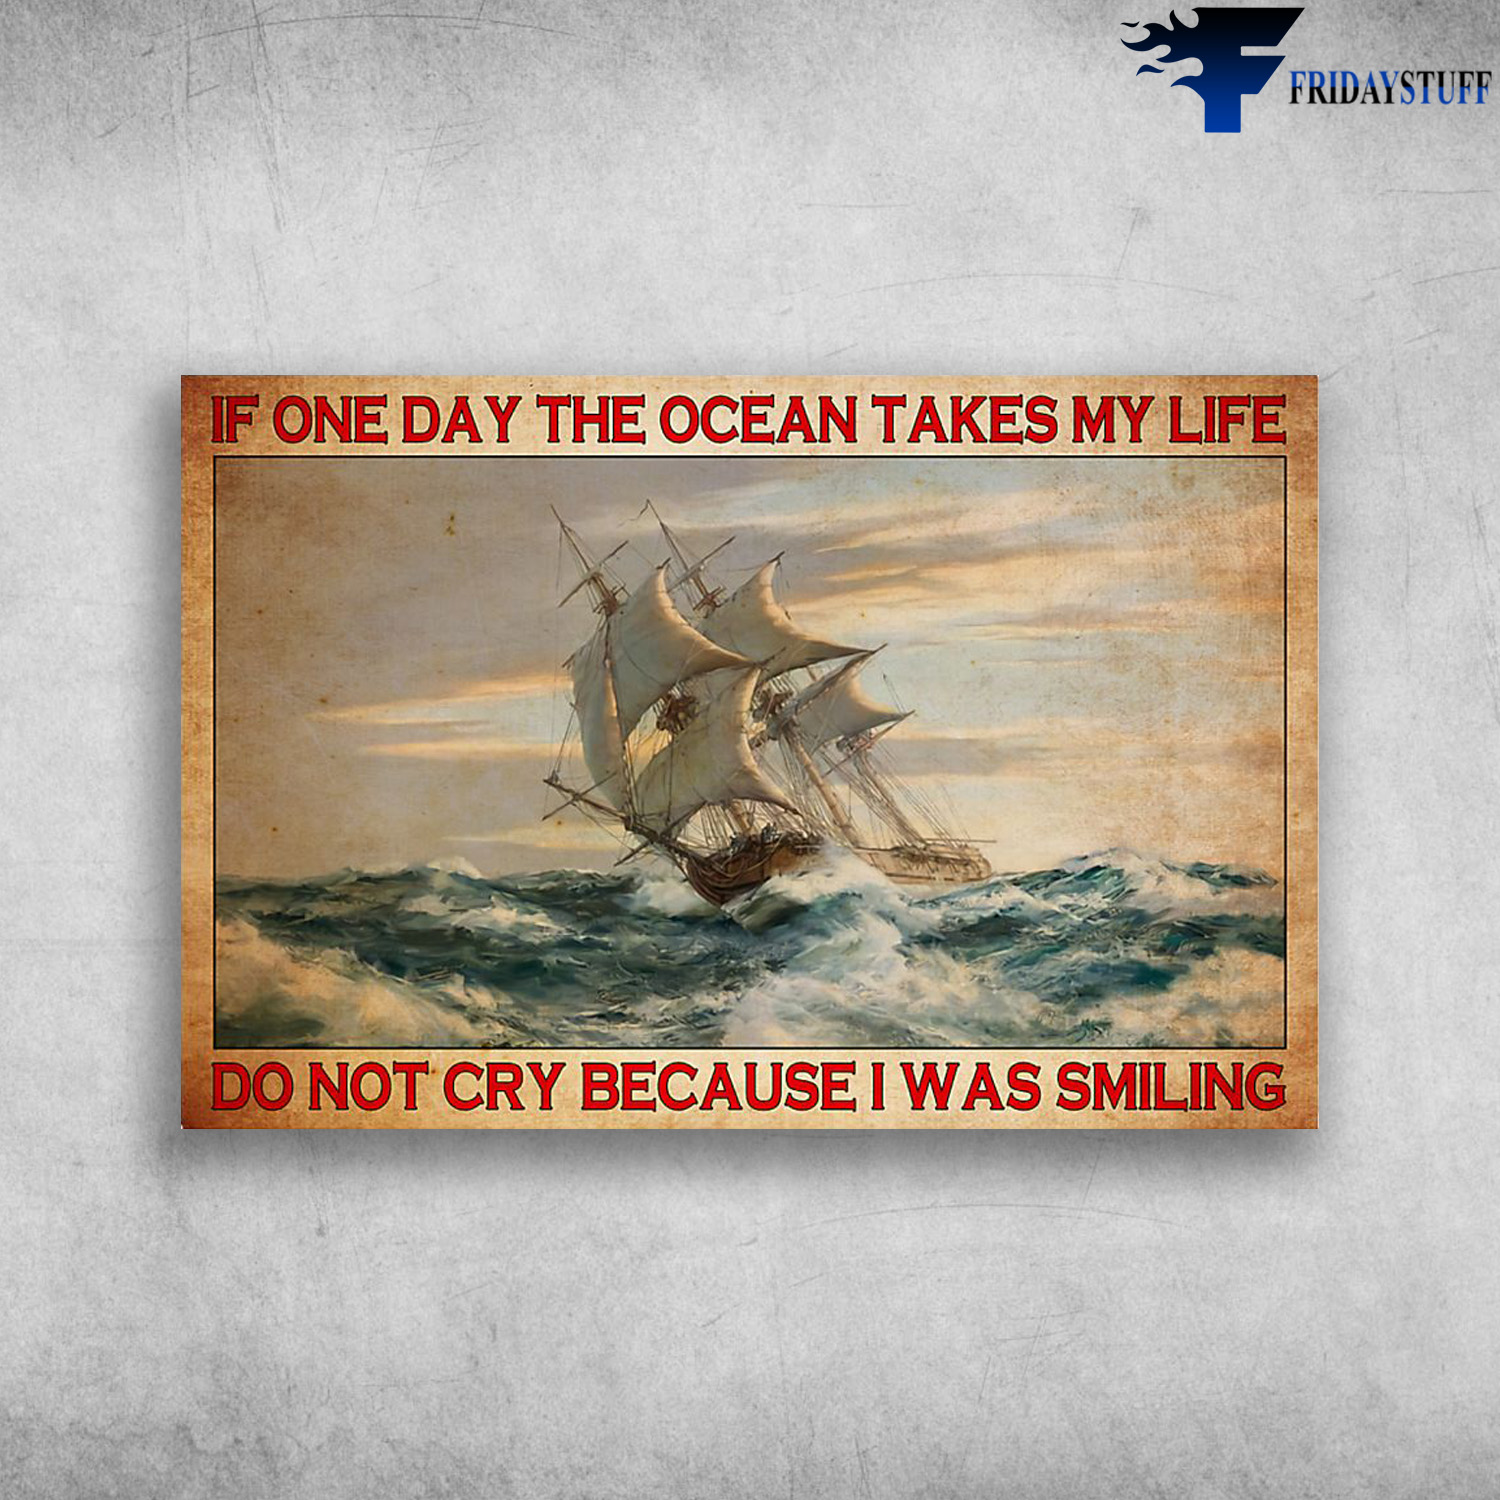 The Ship On The Ocean - If One Day The Ocean Takes My Life, Do Not Cry Because I Was Smiling